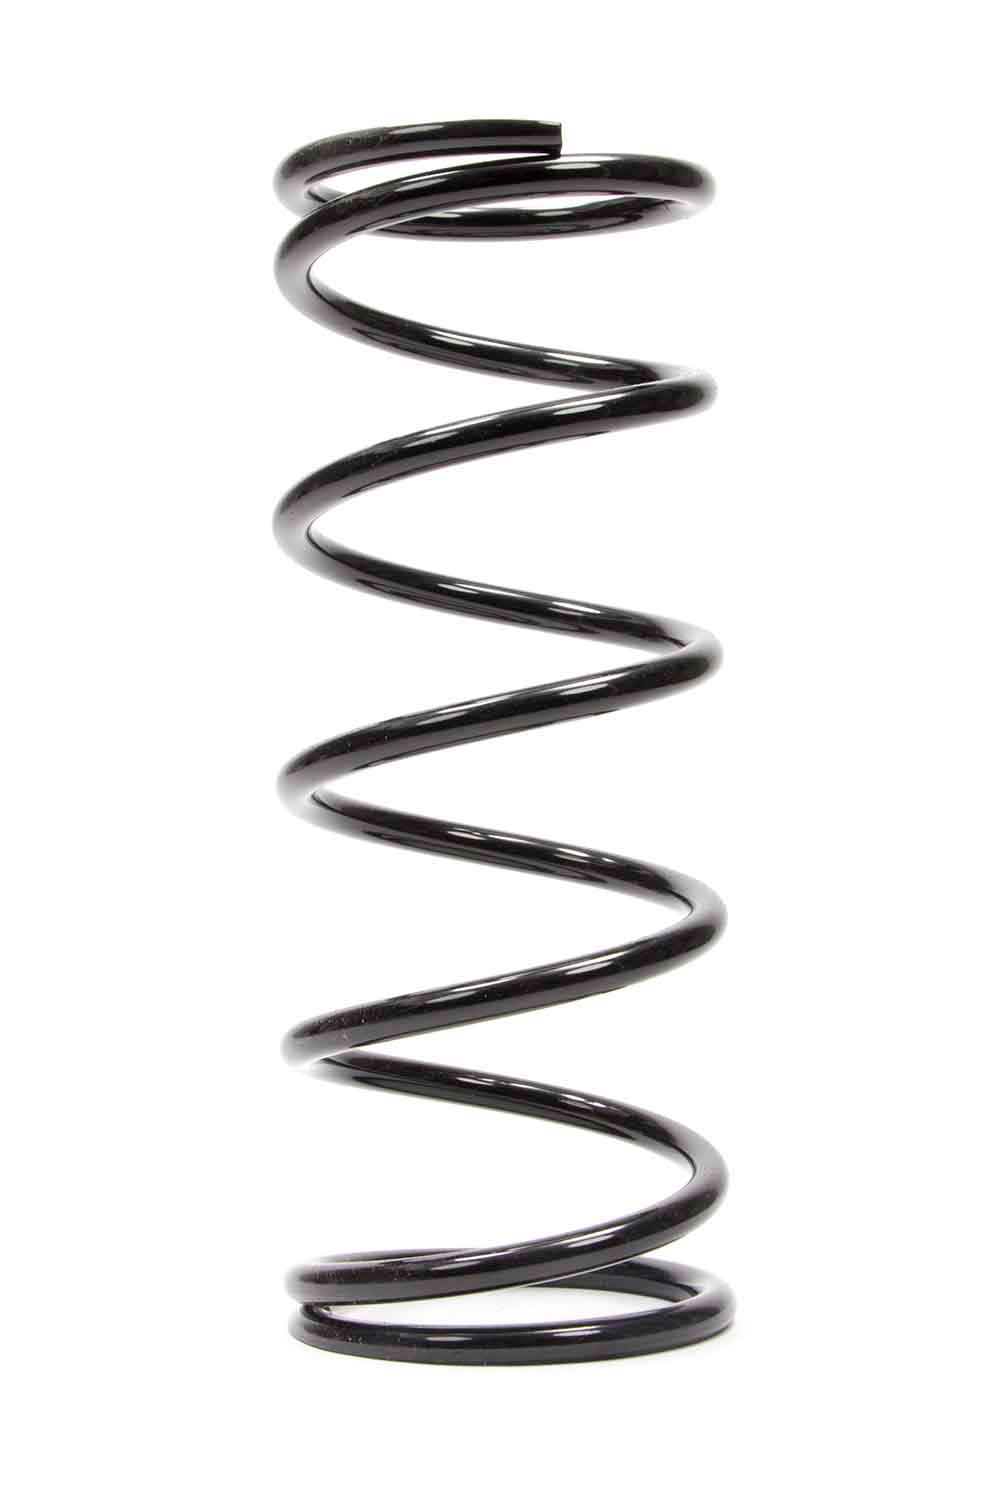 Conv Rear Spring 5in x 13in x 200 - Burlile Performance Products